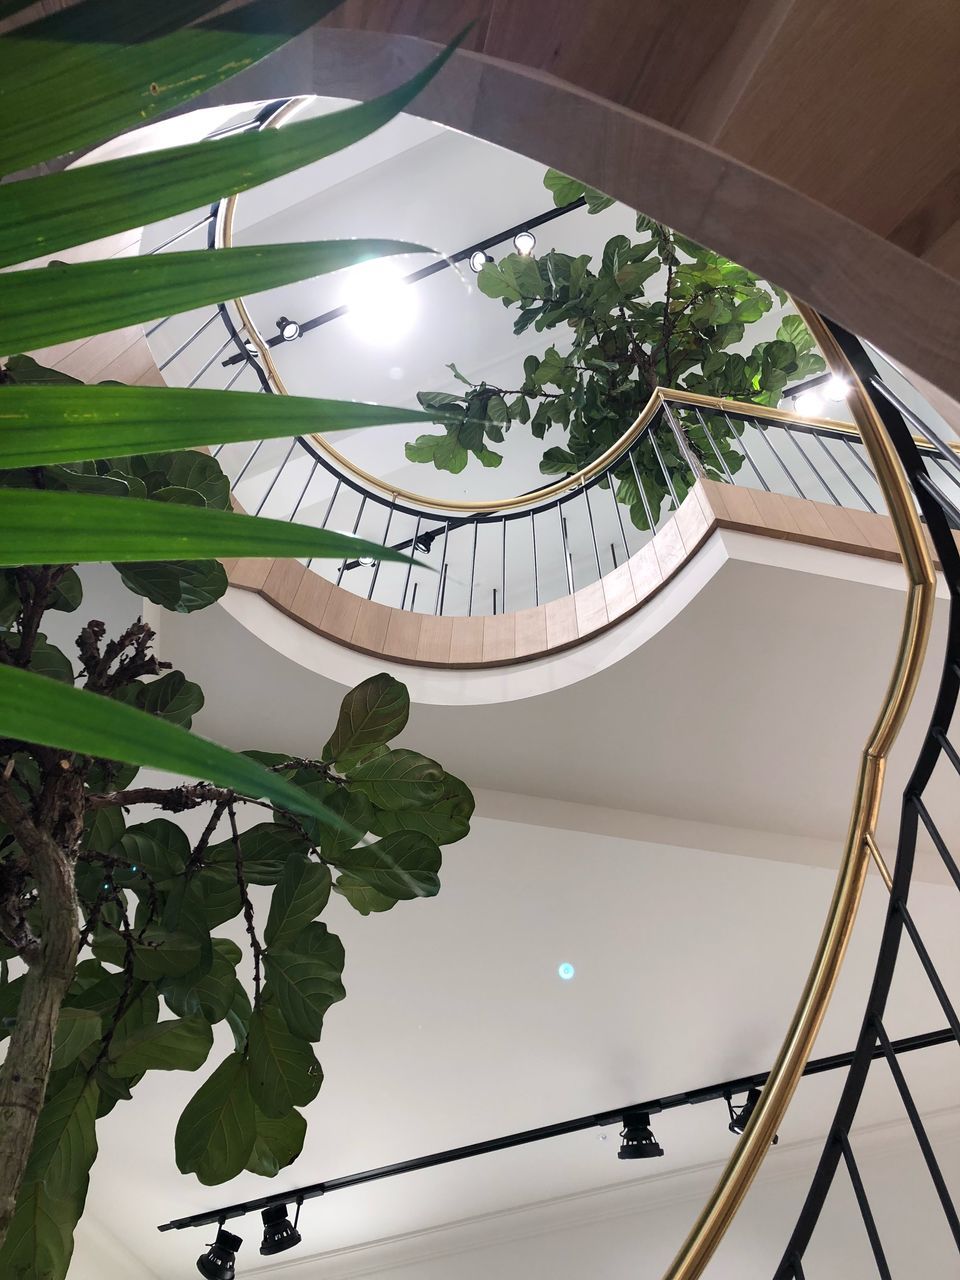 plant, architecture, low angle view, indoors, railing, built structure, day, growth, nature, staircase, leaf, plant part, steps and staircases, no people, green color, ceiling, window, reflection, tree, glass - material, skylight, directly below